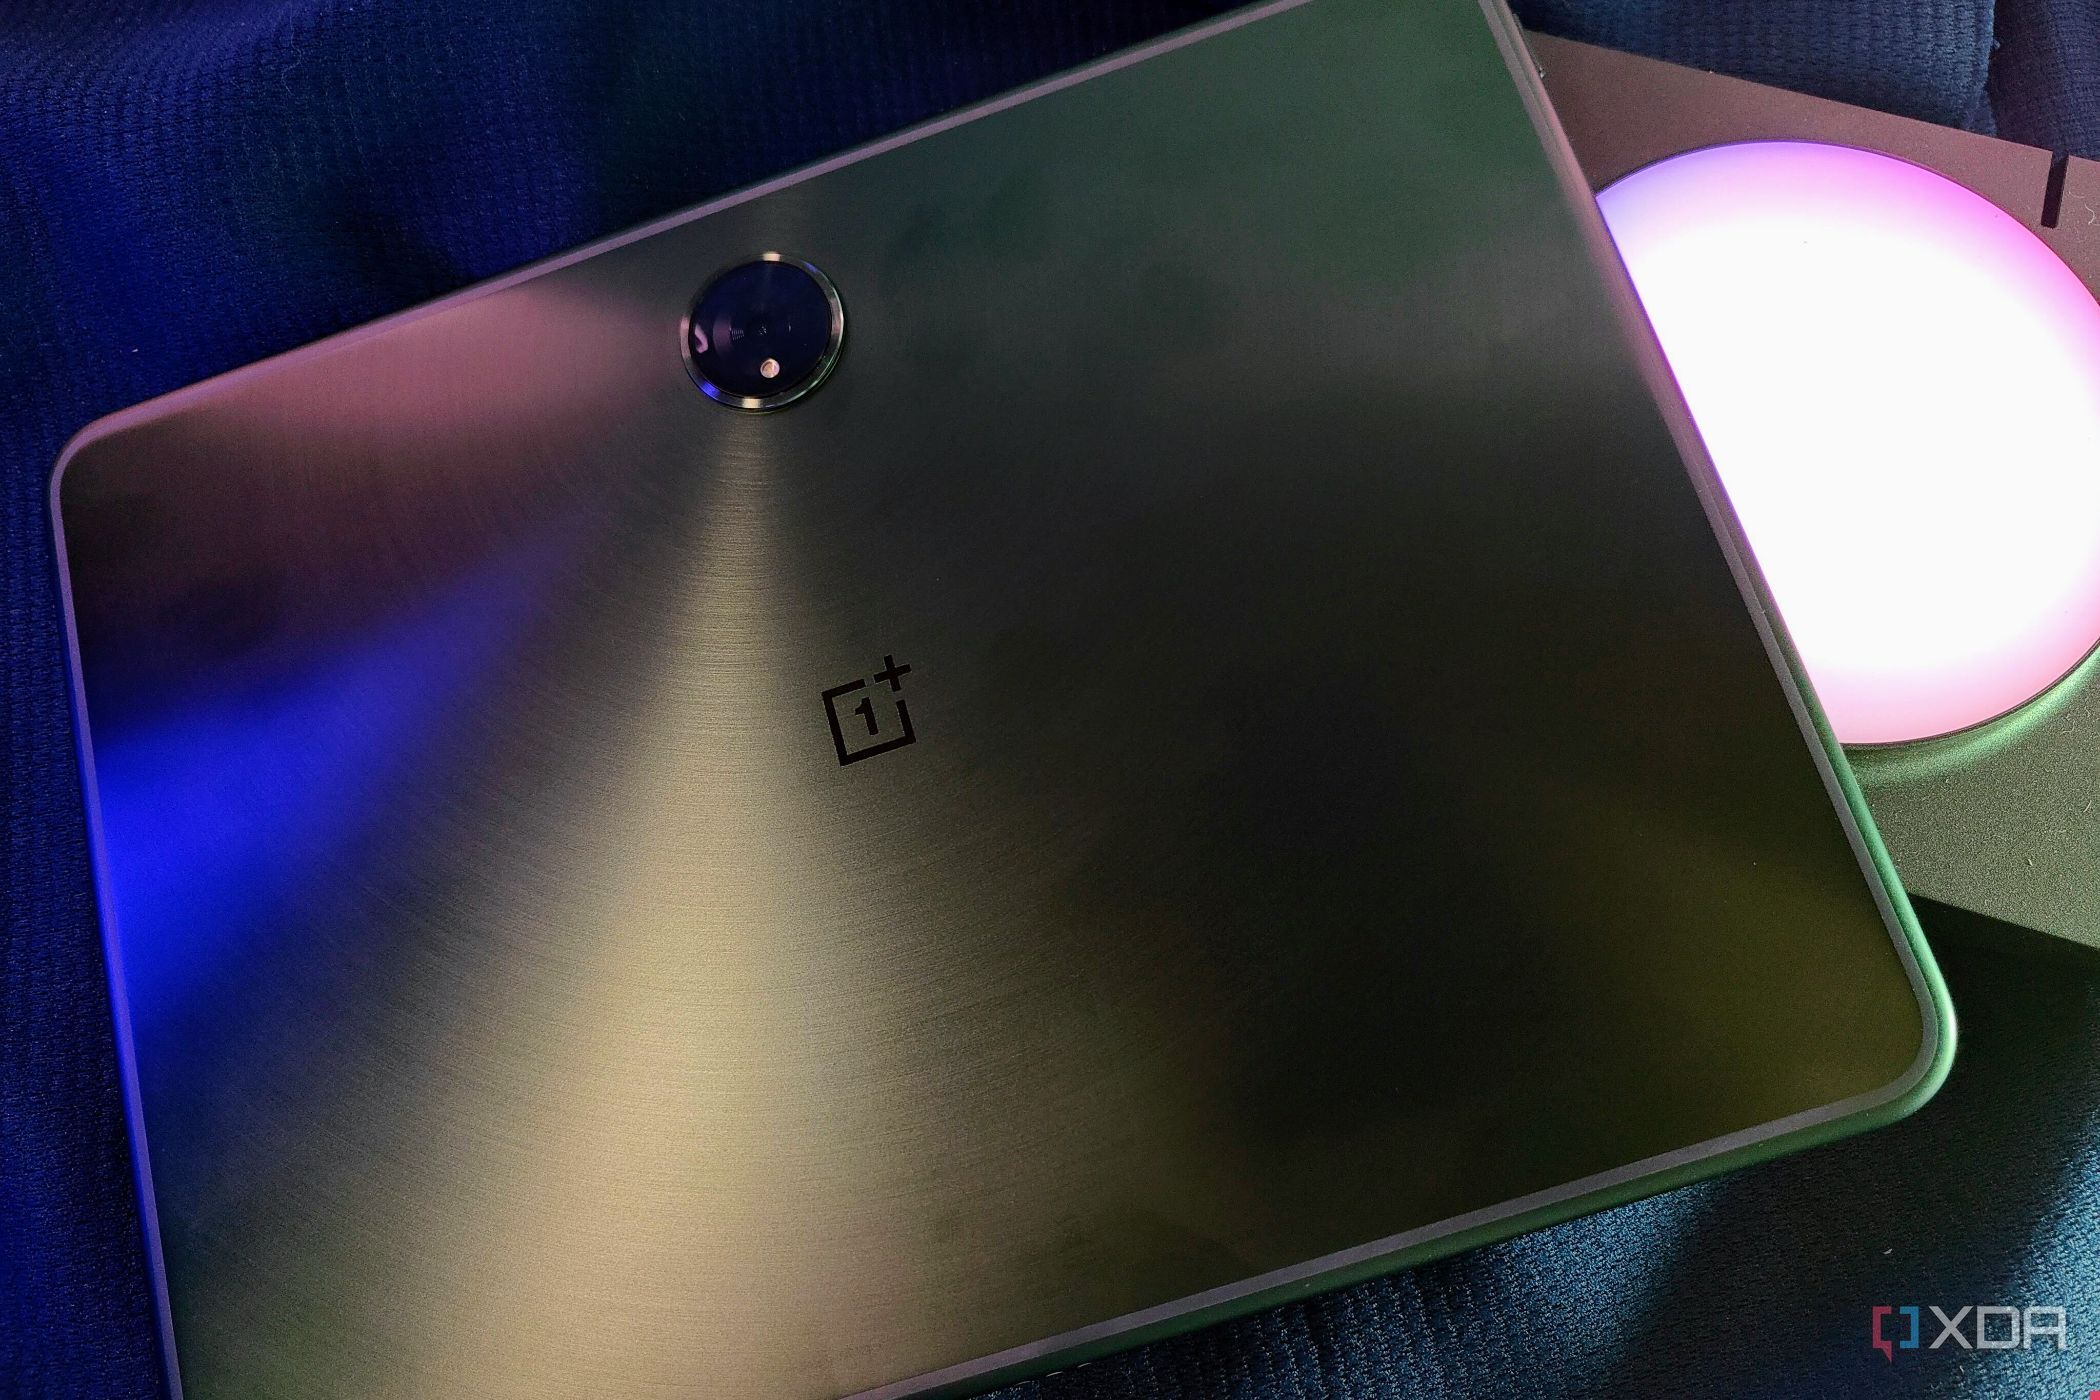 OnePlus Pad review: Solid hardware that's let down by Android